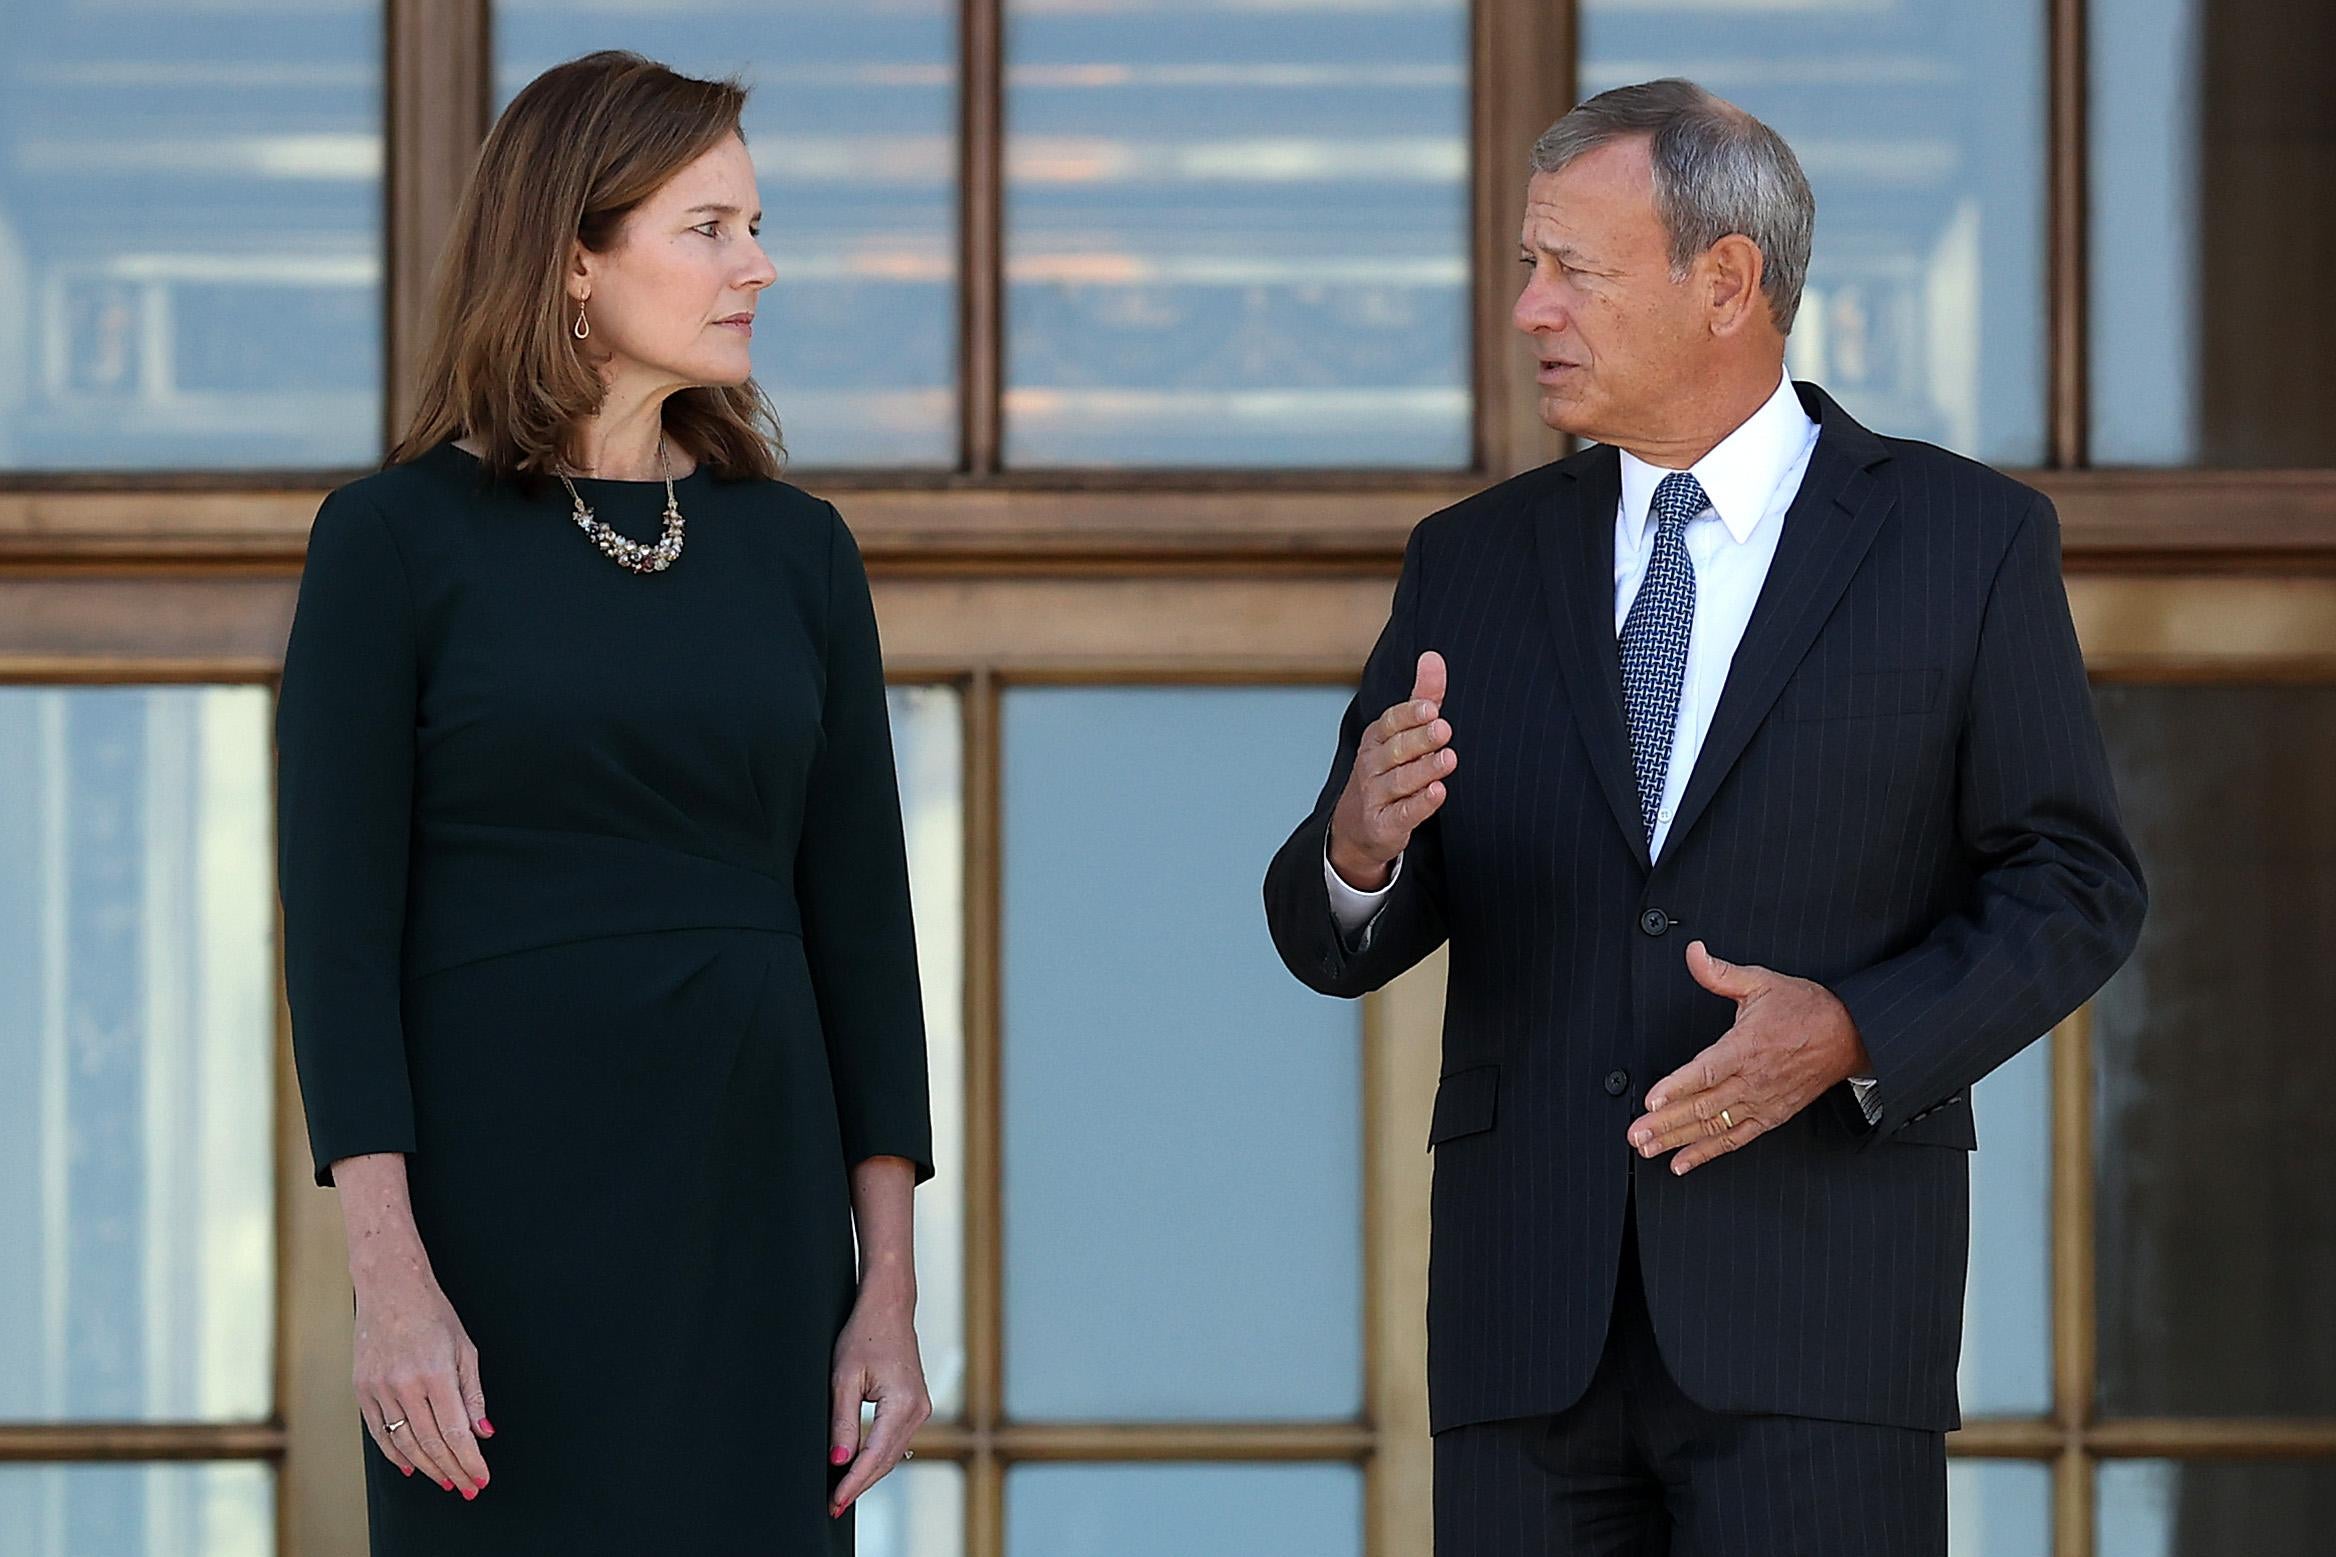 Amy Coney Barrett and John Roberts talk at the top of the Supreme Court’s marble steps.